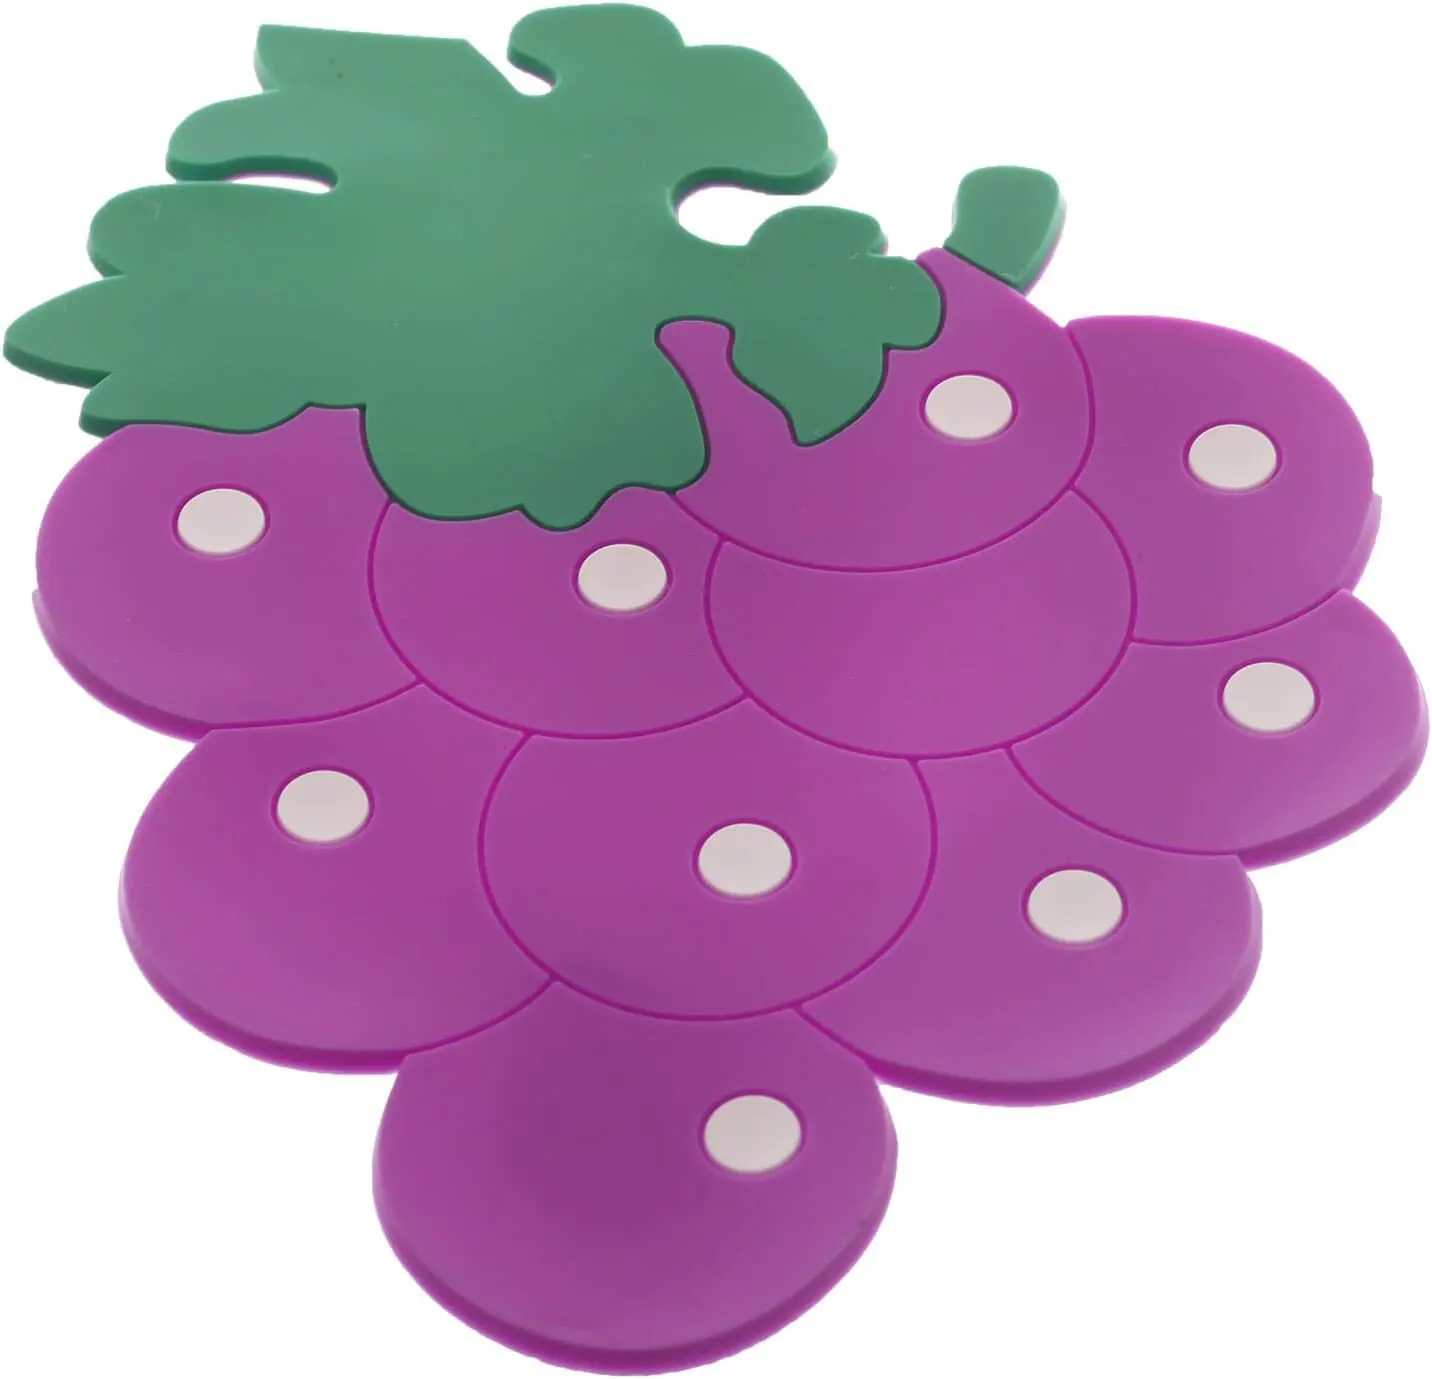 A set of fruit-shaped heat-insulating silicone coasters, 2 pieces